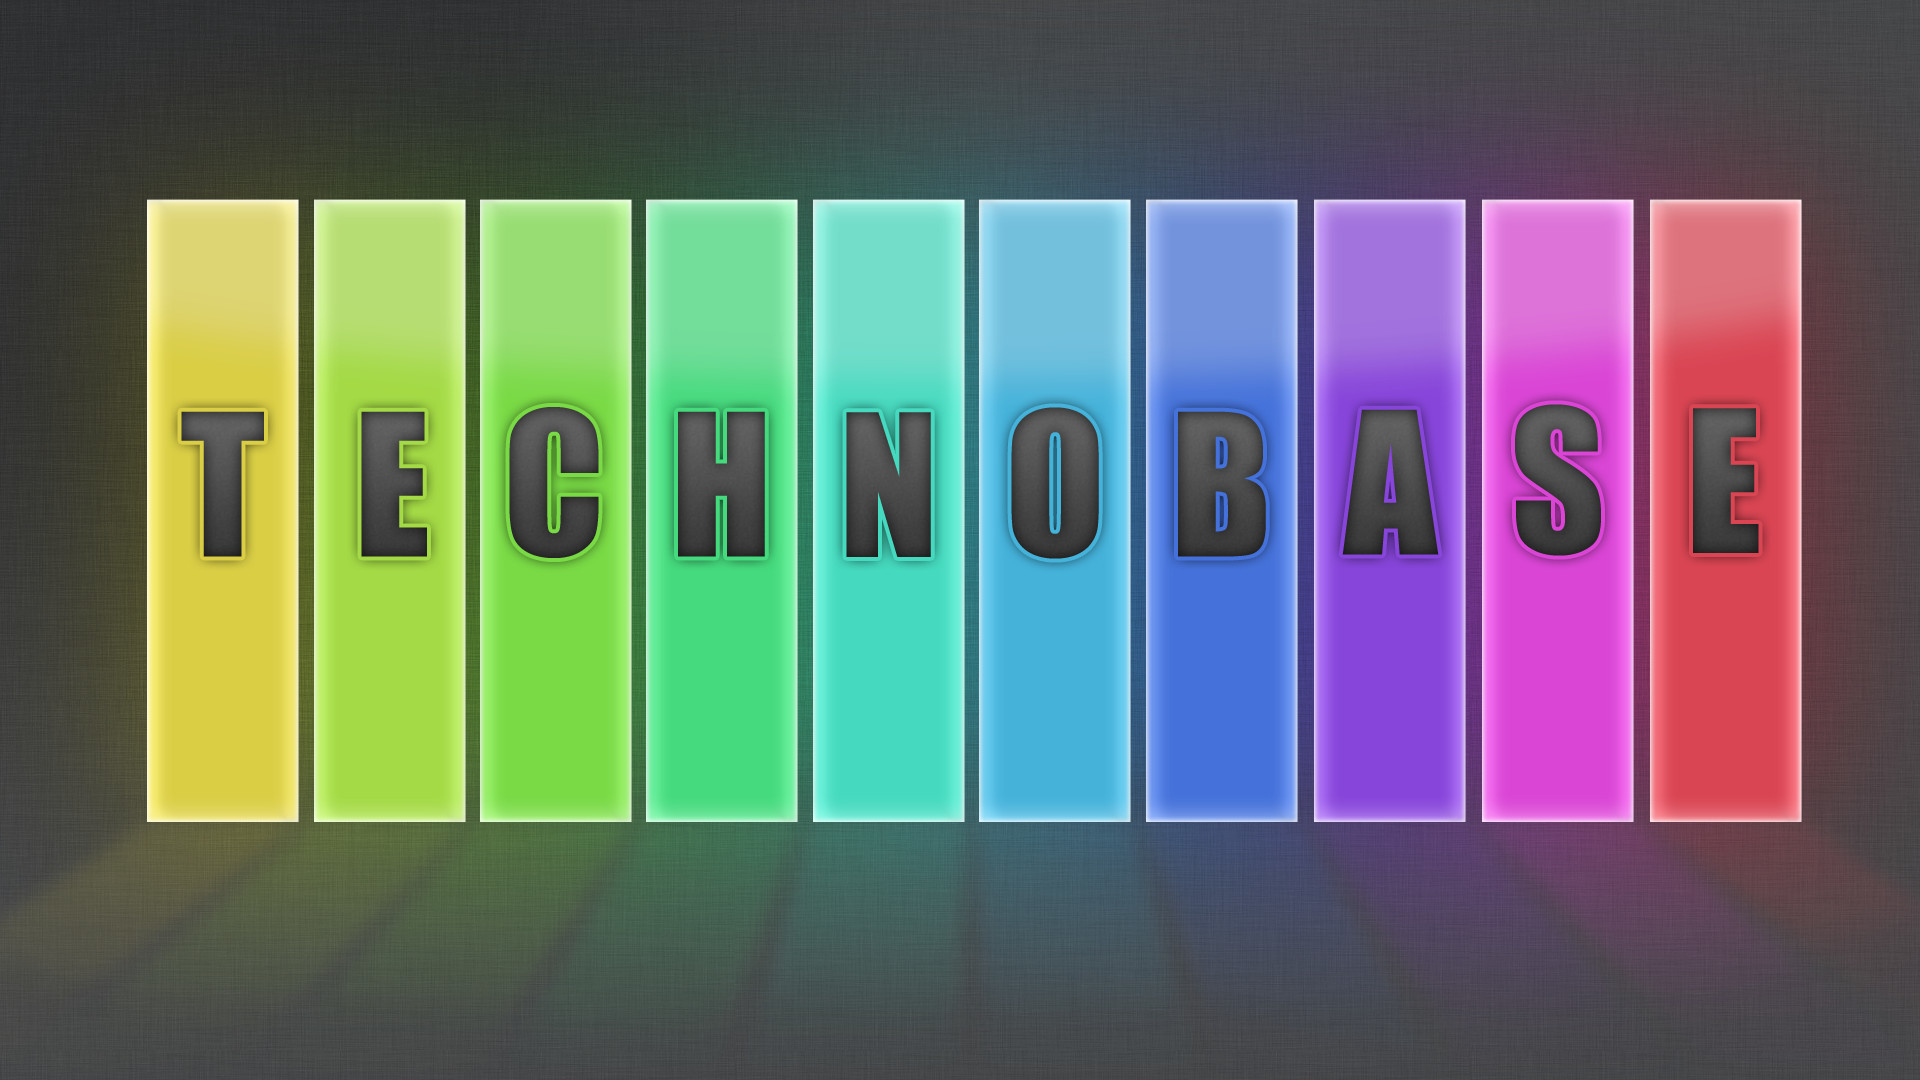 1920x1080 Technobase Color Wallpaper by chiefwrigley Technobase Color Wallpaper by  chiefwrigley